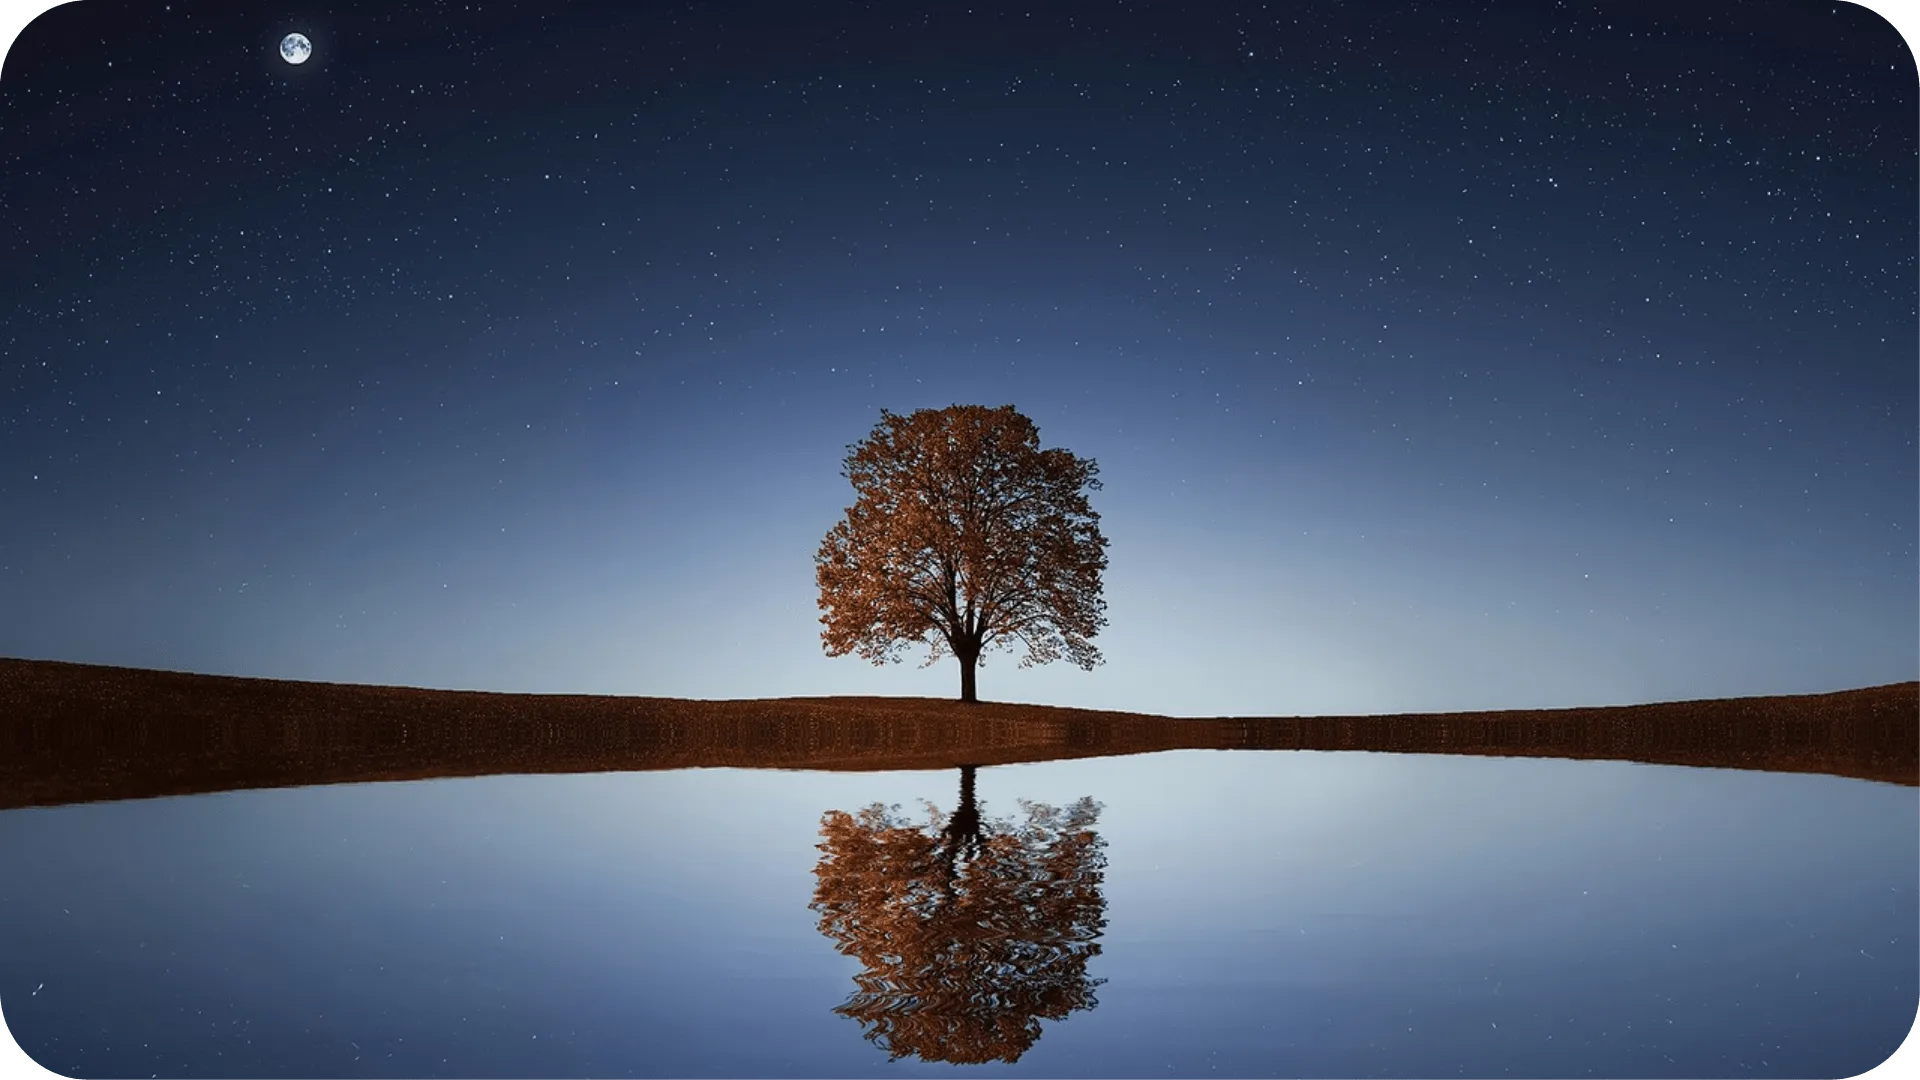 A lone tree next to a lake, with a clear reflection of the tree in the water.